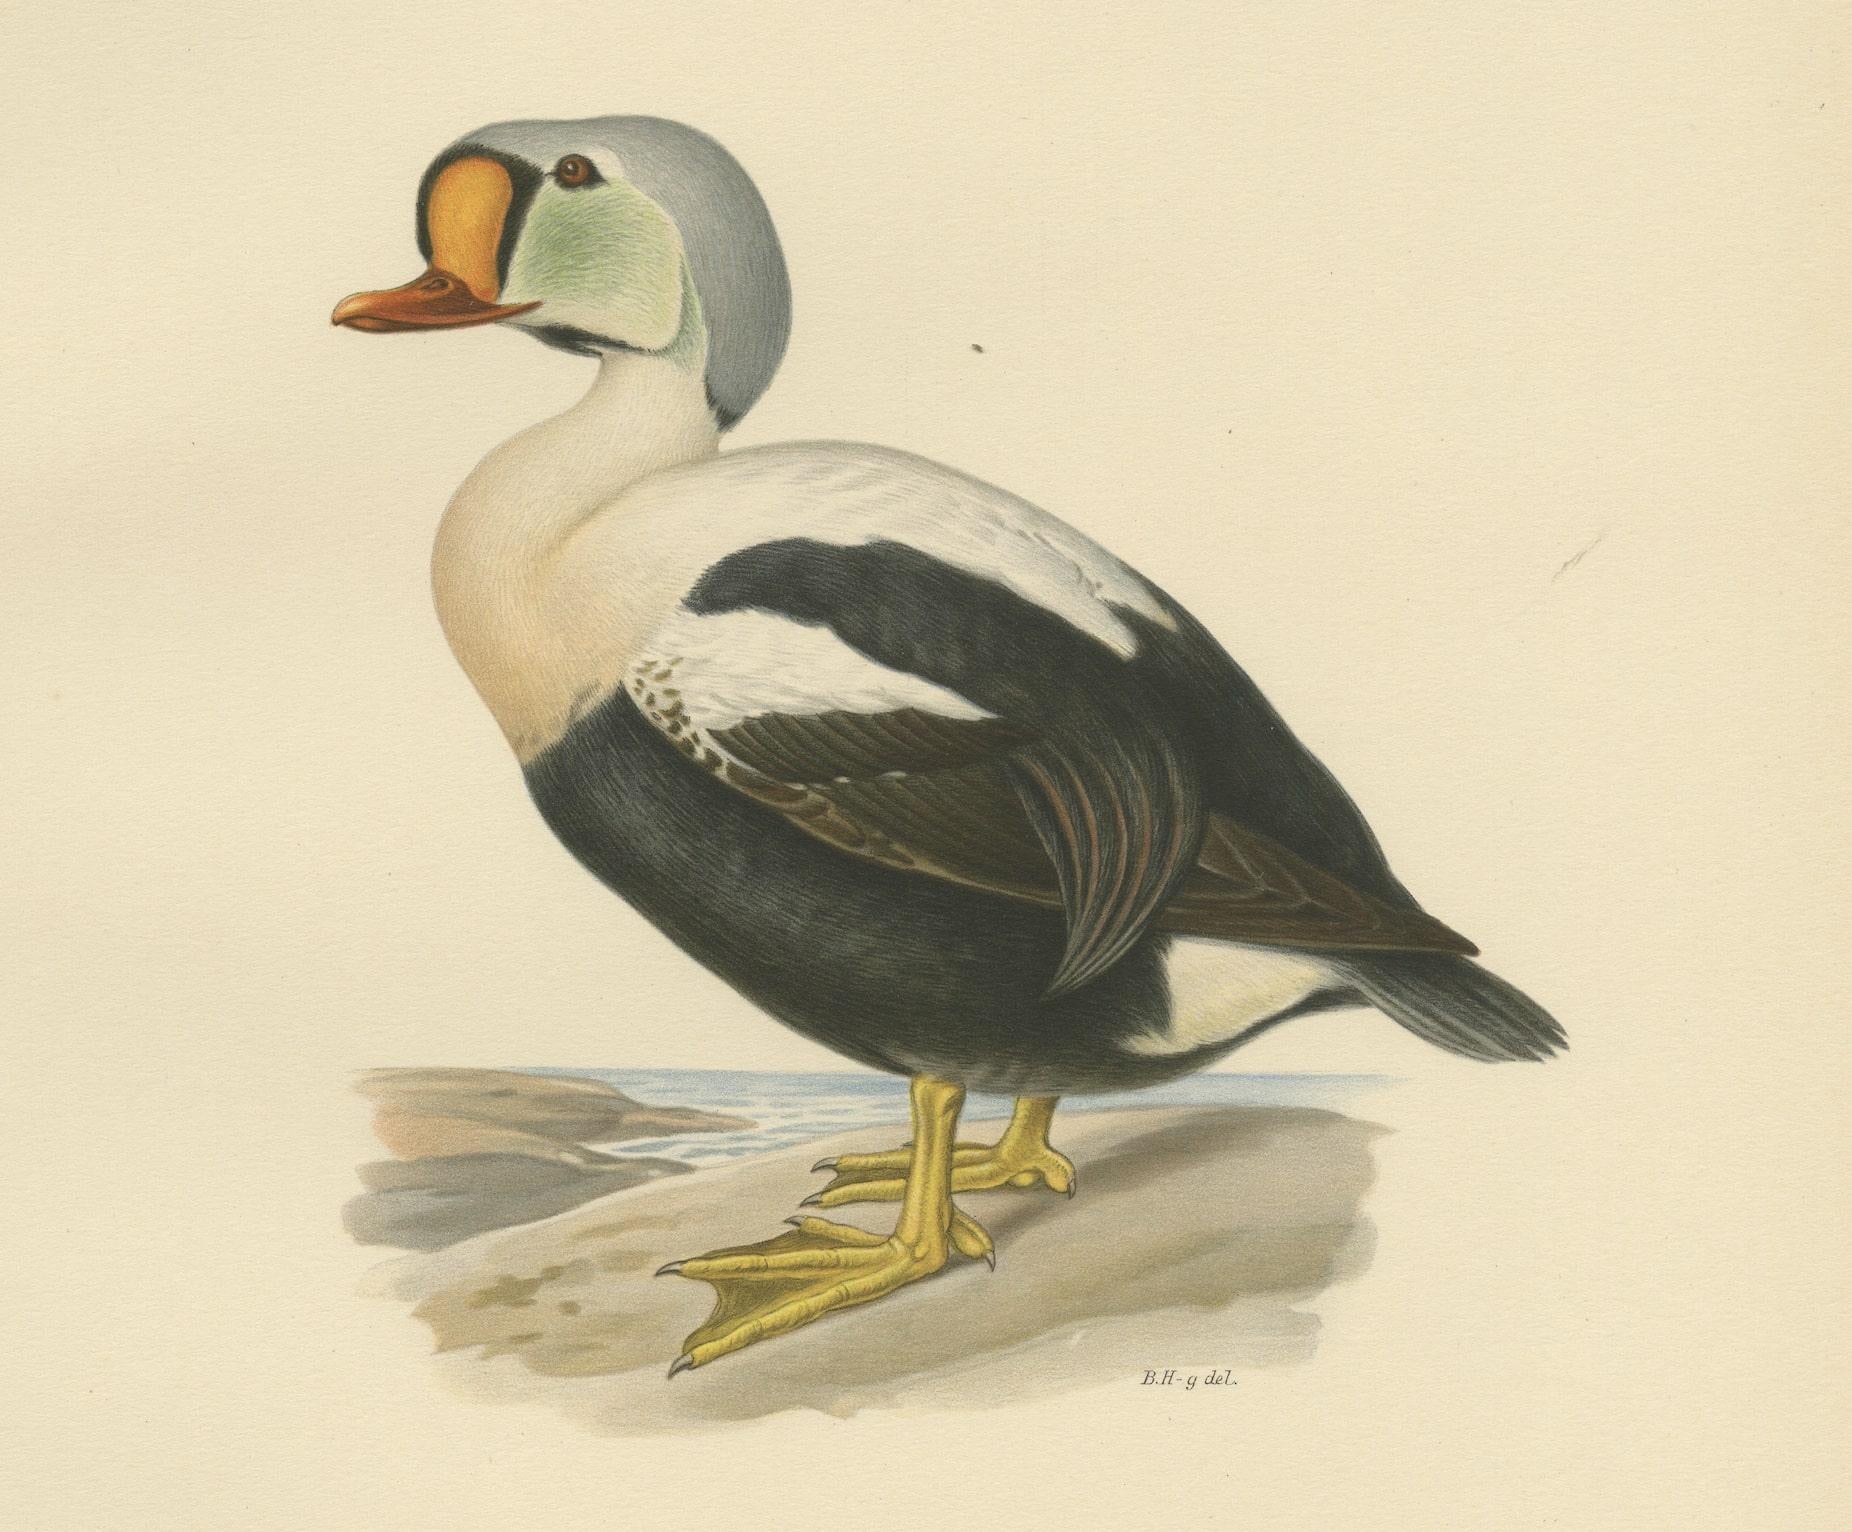 This ornithological print features the Somateria spectabilis, commonly known as the King Eider, from the celebrated 